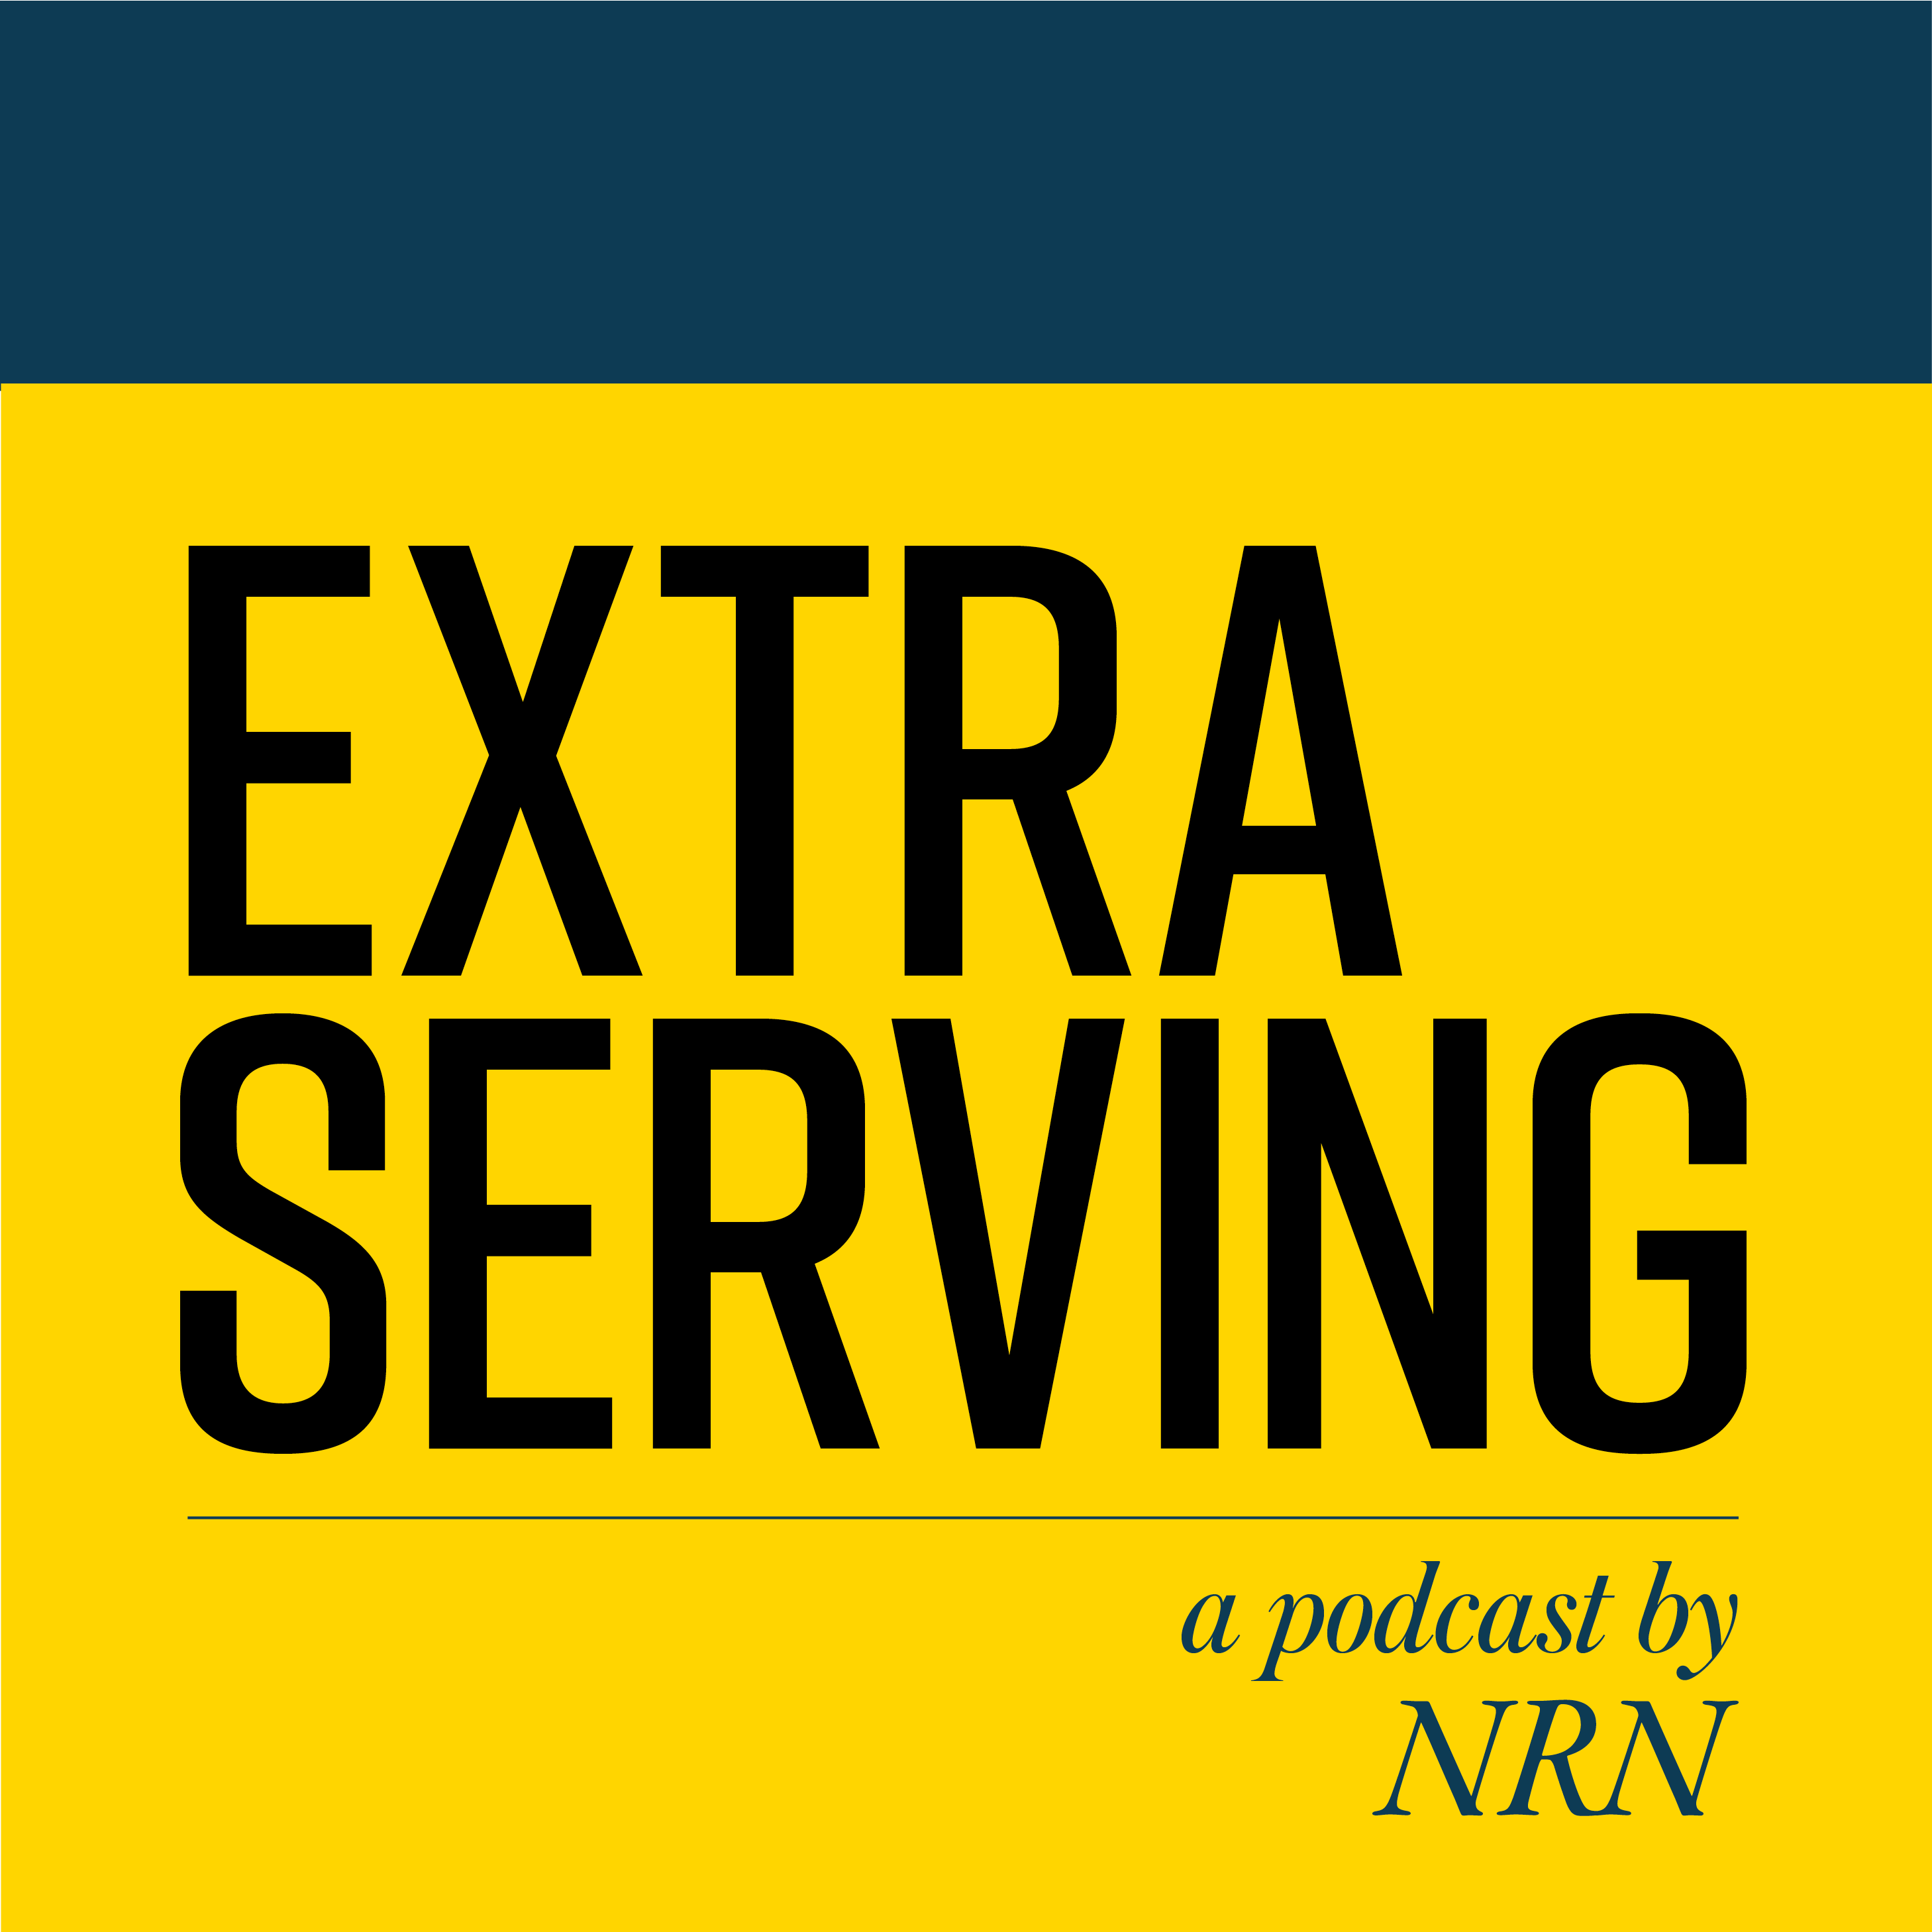 NRN editors discuss hidden RRF money and McDonald’s and Chipotle raising menu prices